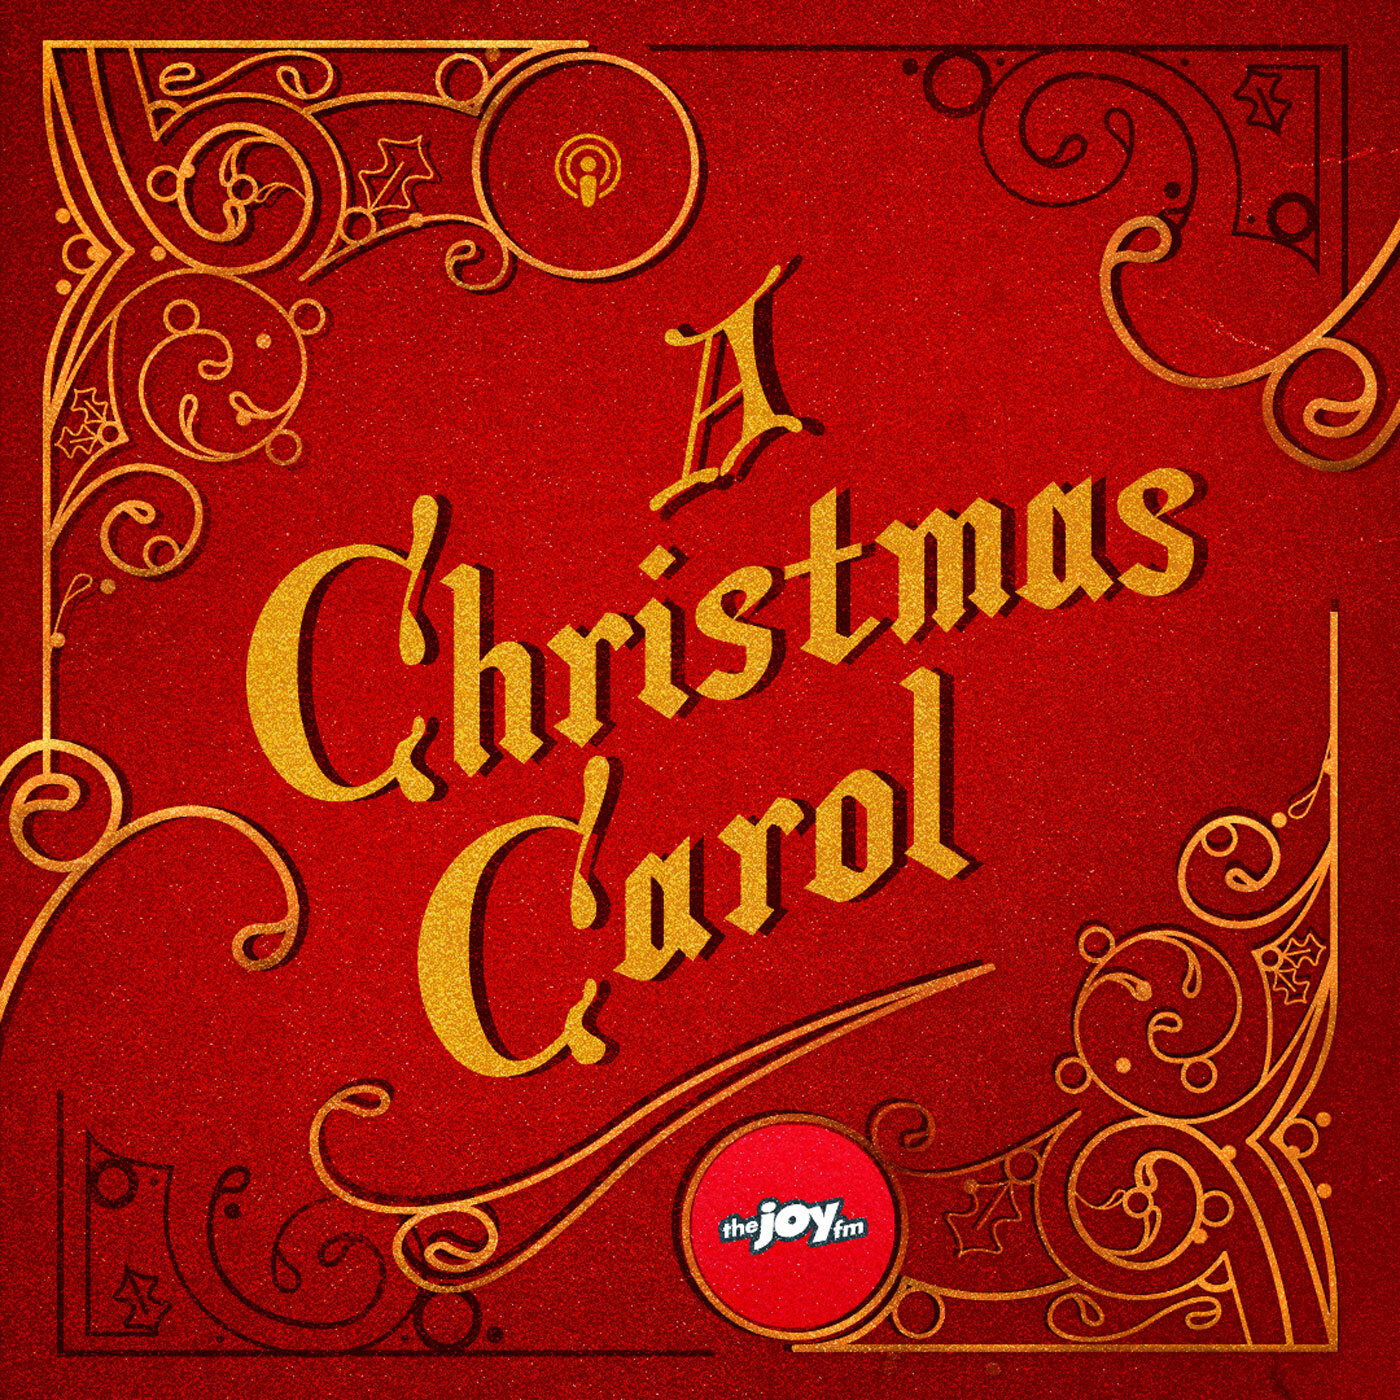 A Christmas Carol - Episode 3: Unwrapping the Present